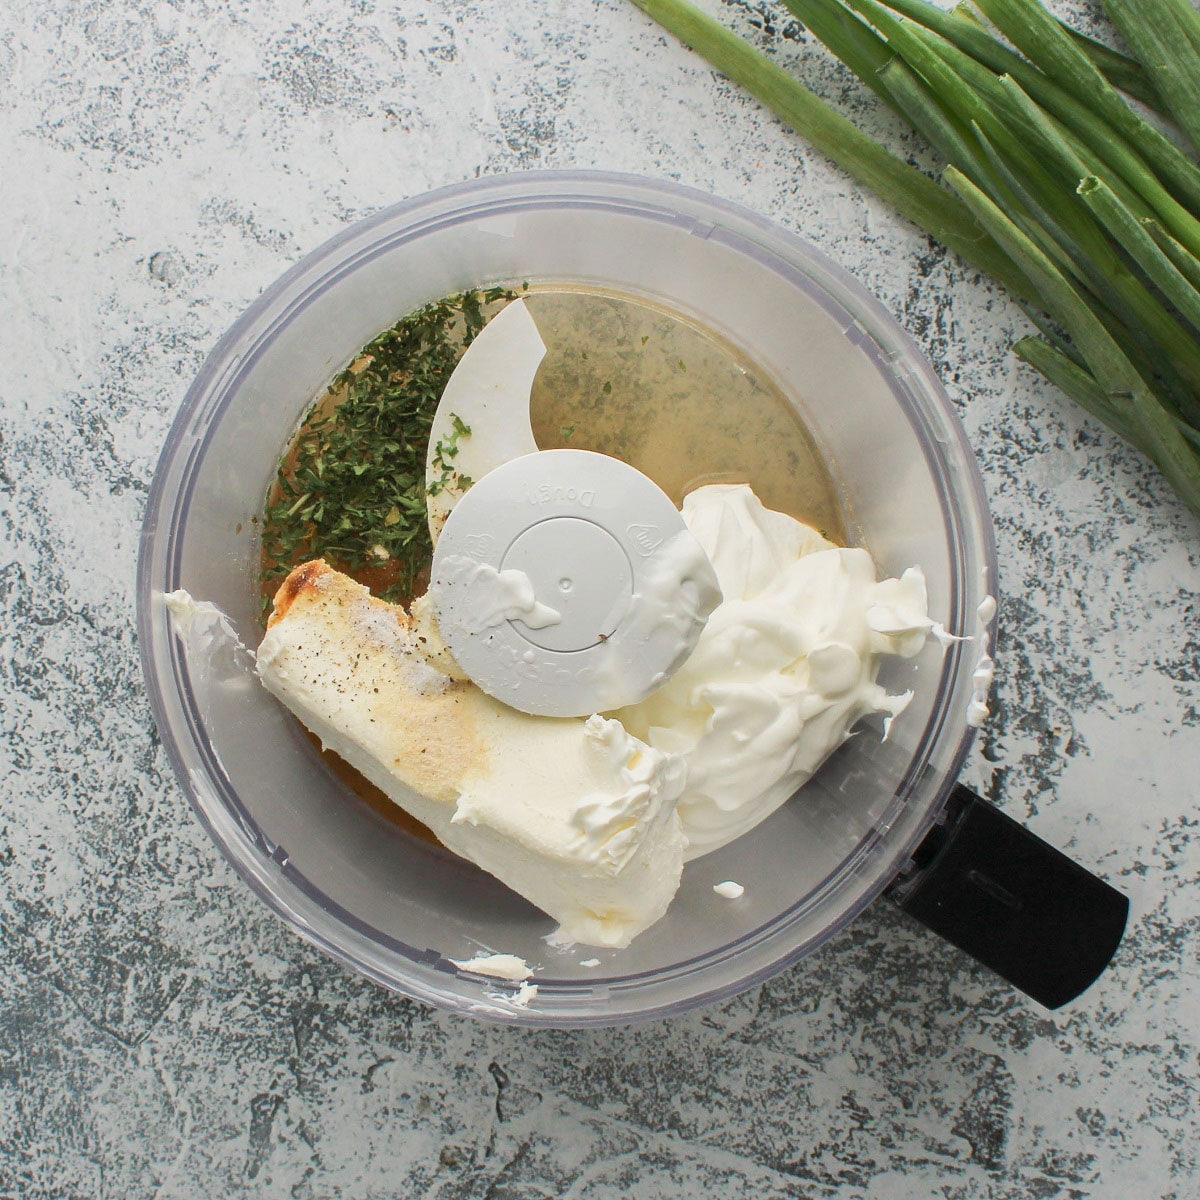 Cream cheese, sour cream, and seasoning added to a food processor to make a green onion dip.